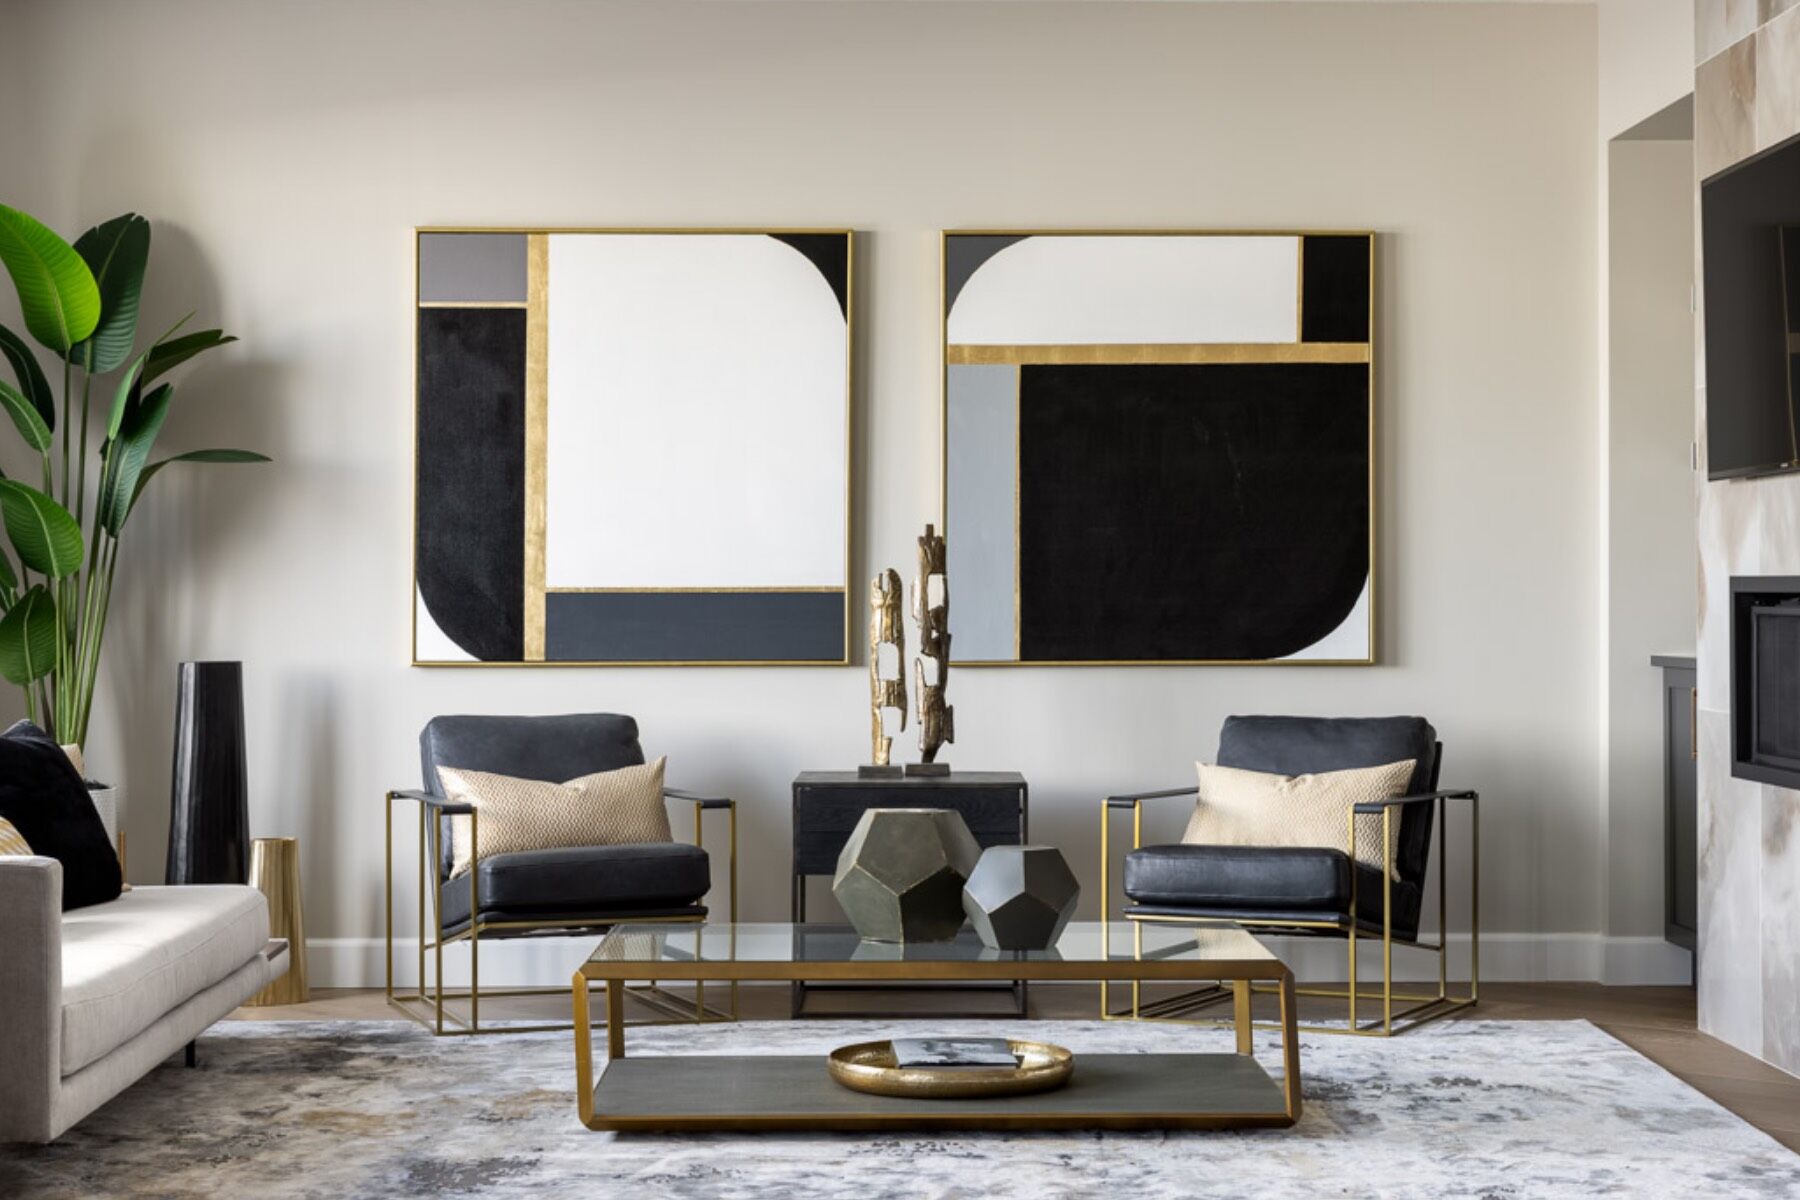 Seating space with black chairs and neutral abstract art on walls.